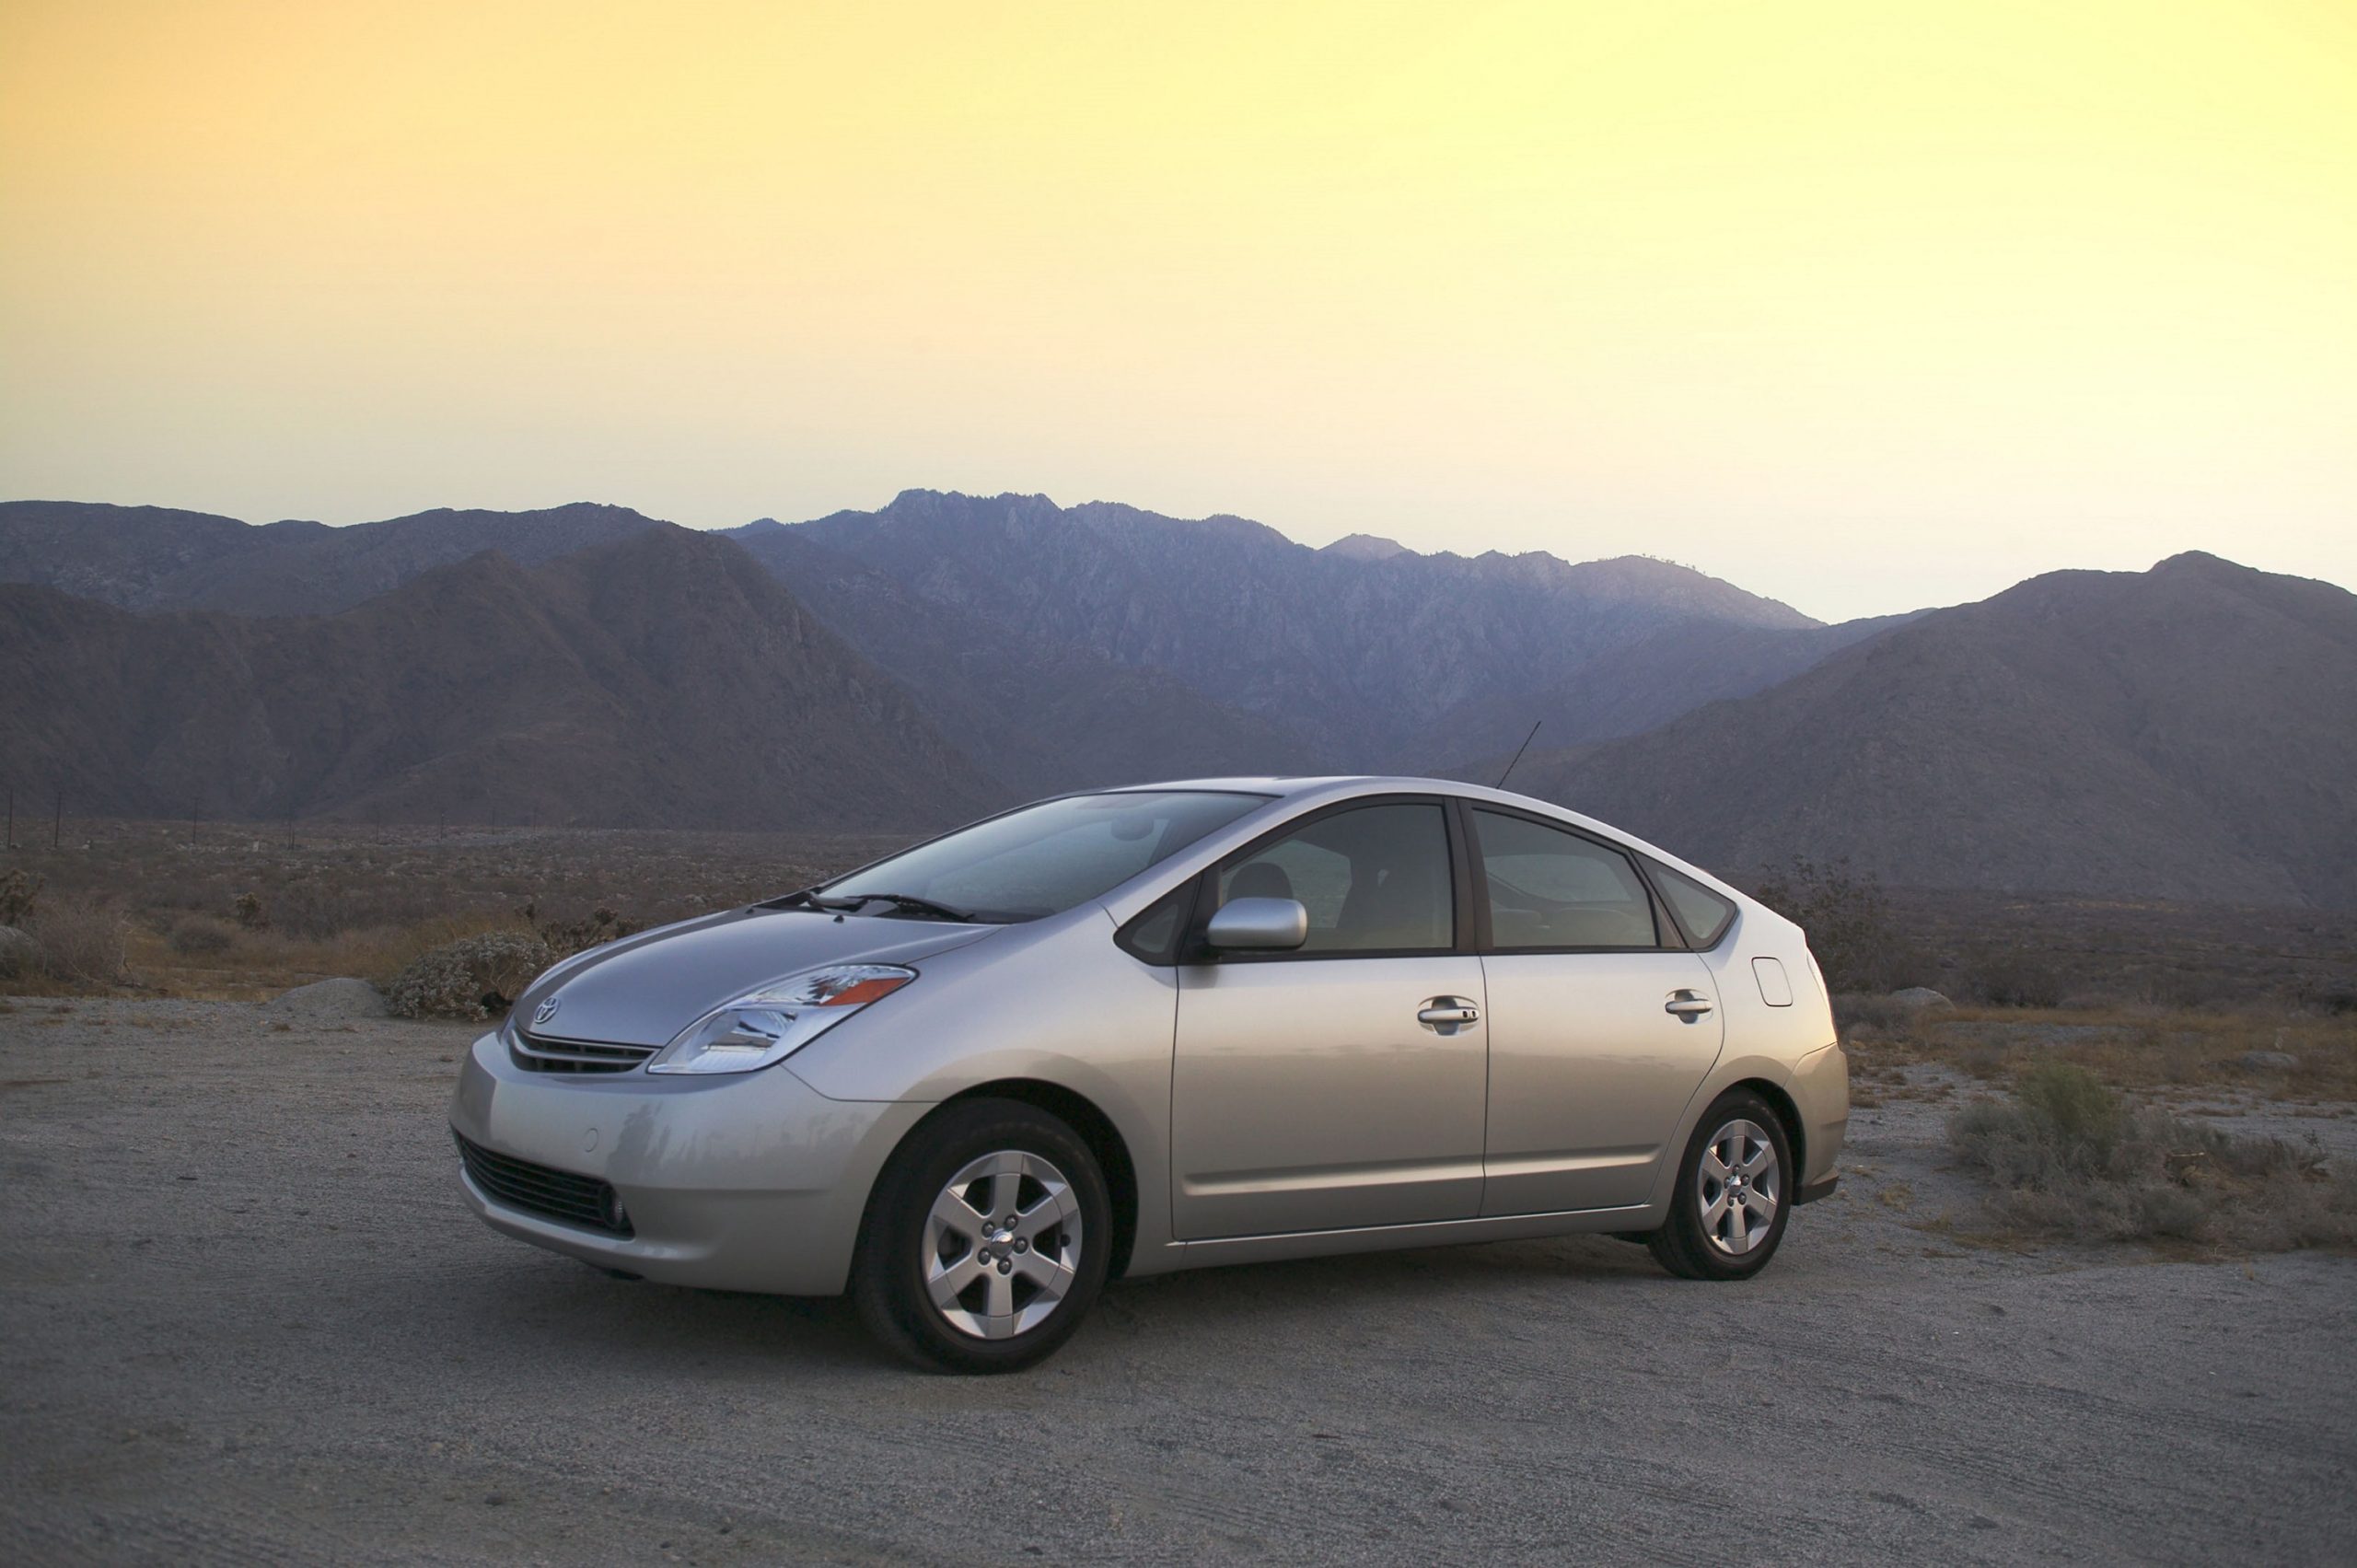 A silver Toyota Prius shot in the Angeles forest from the front 3/4 angle at sunset